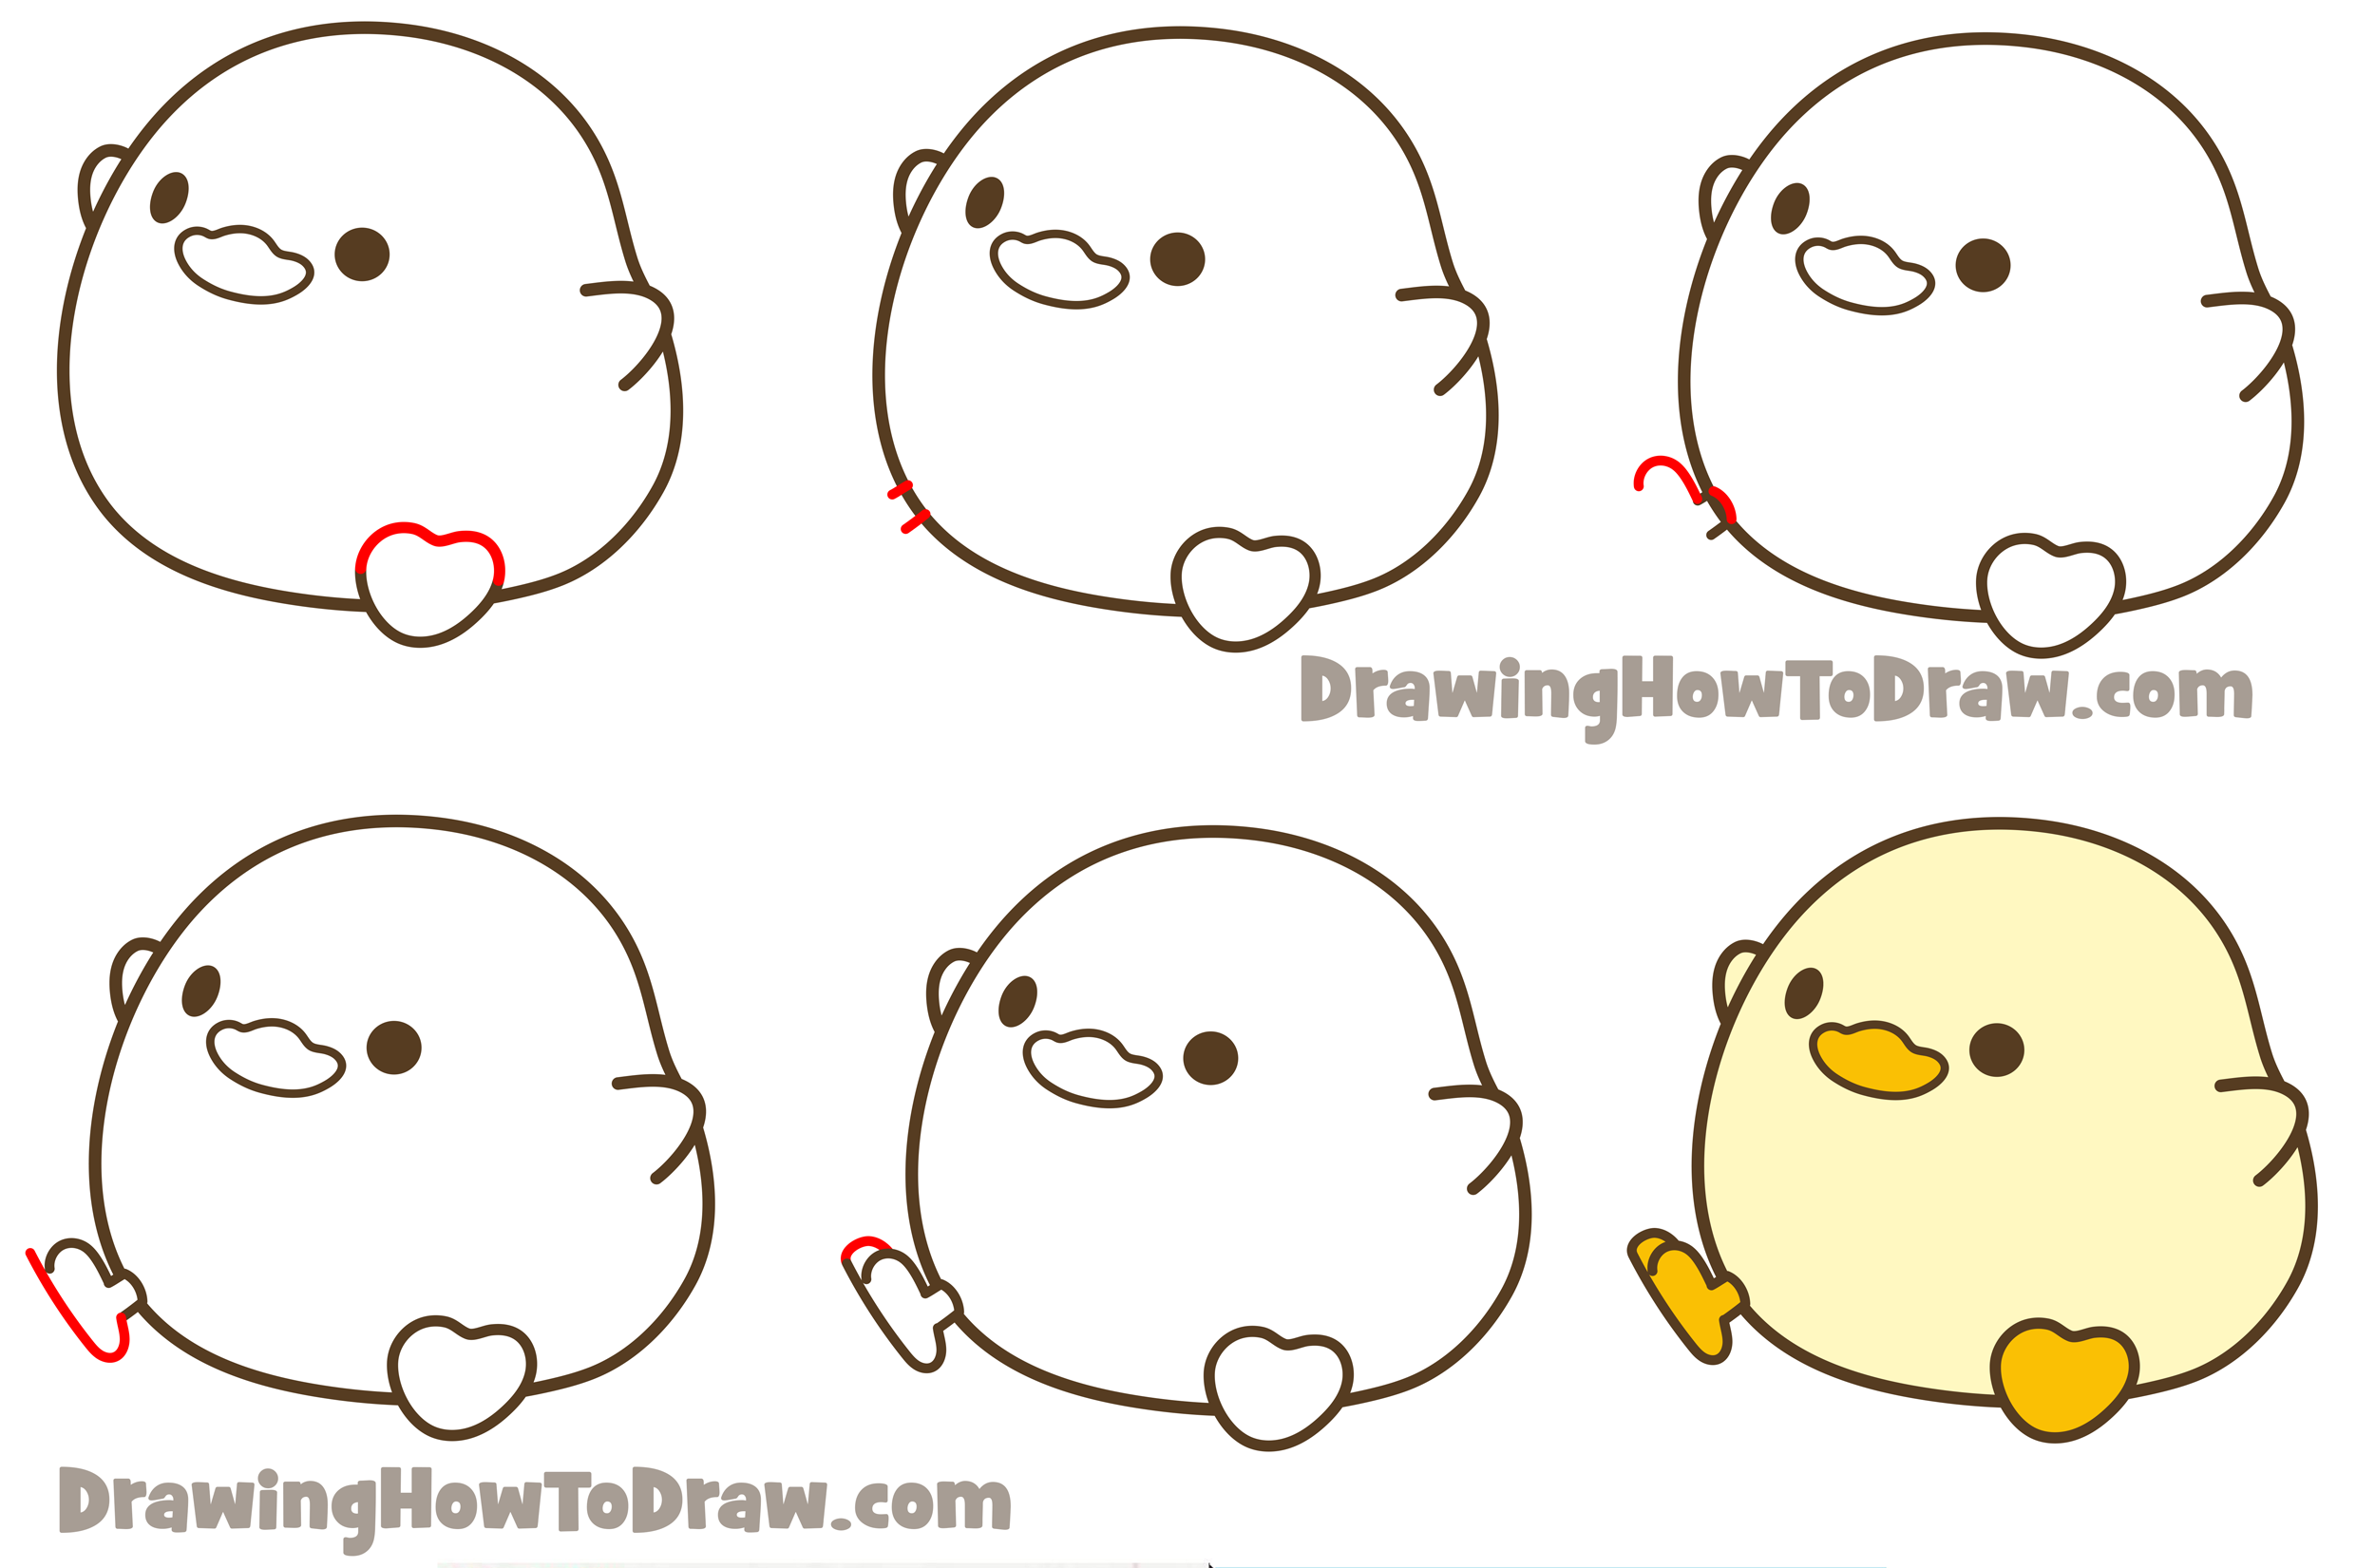 HOW TO DRAW AND COLORING A CUTE LOVE ENVELOPE KAWAII EASY STEP BY STEP -  YouTube